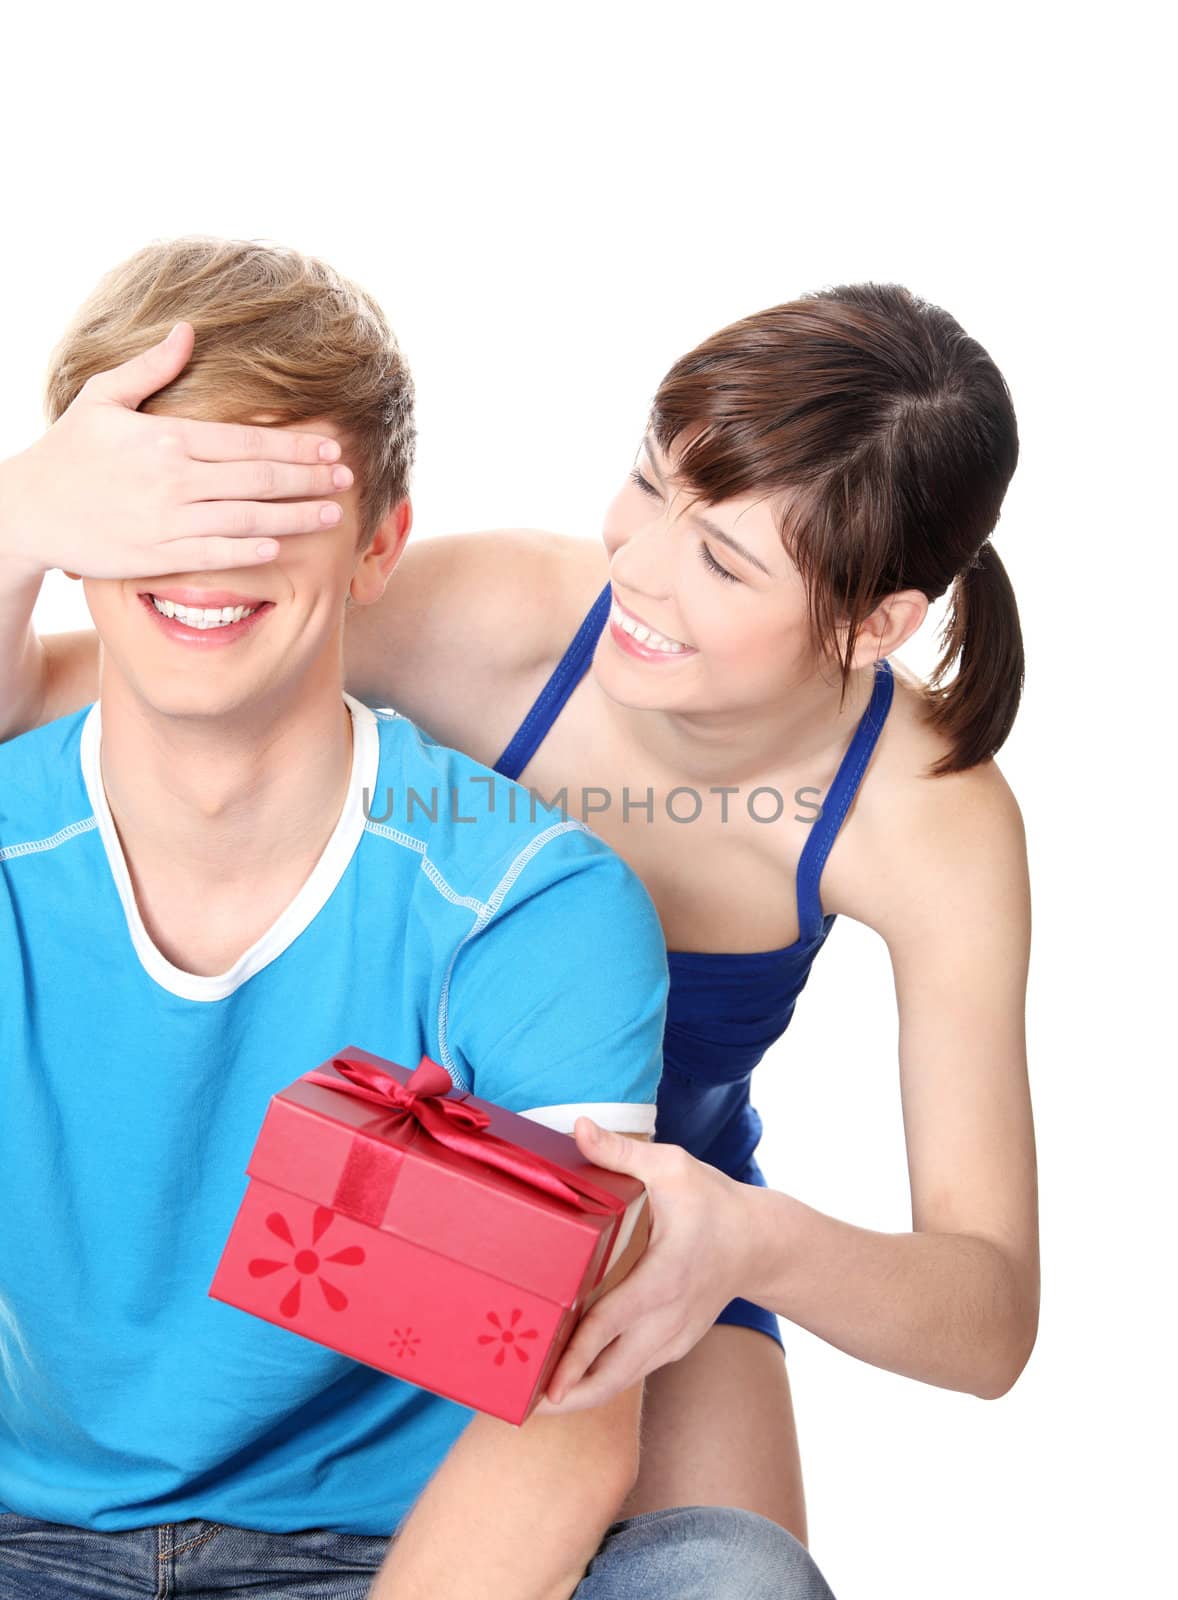 Girl give a gift to her boyfriend. Isolated on white background.